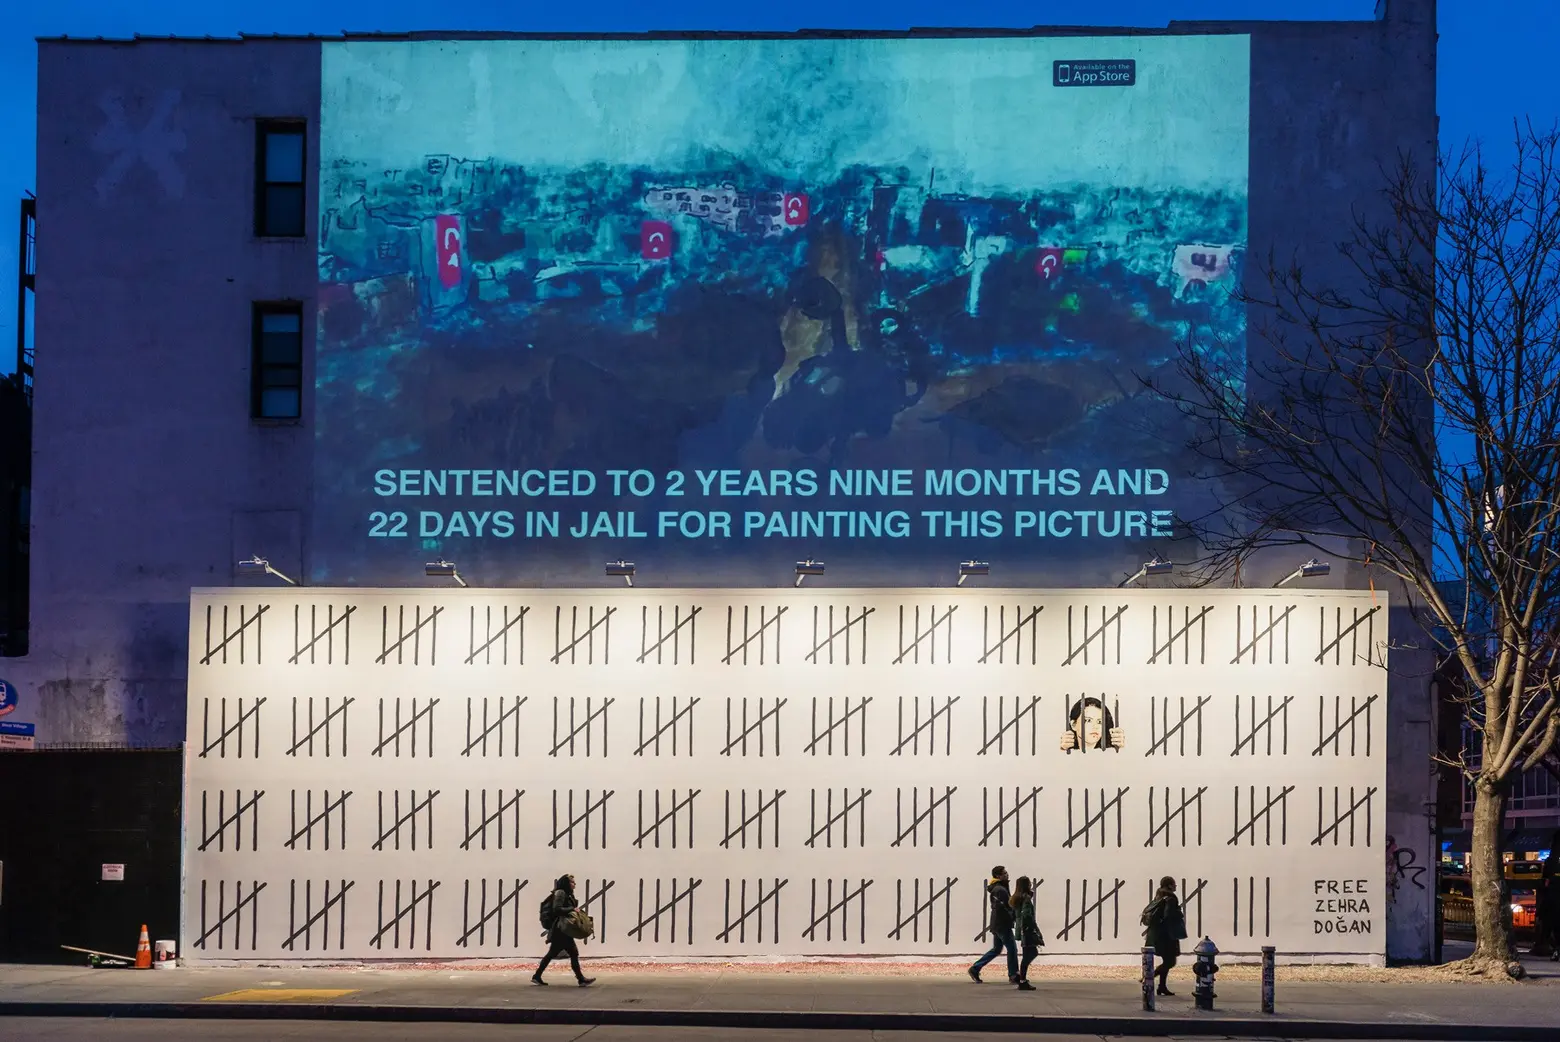 Banksy unveils mural at historic Houston Bowery Wall protesting Turkish artist’s imprisonment